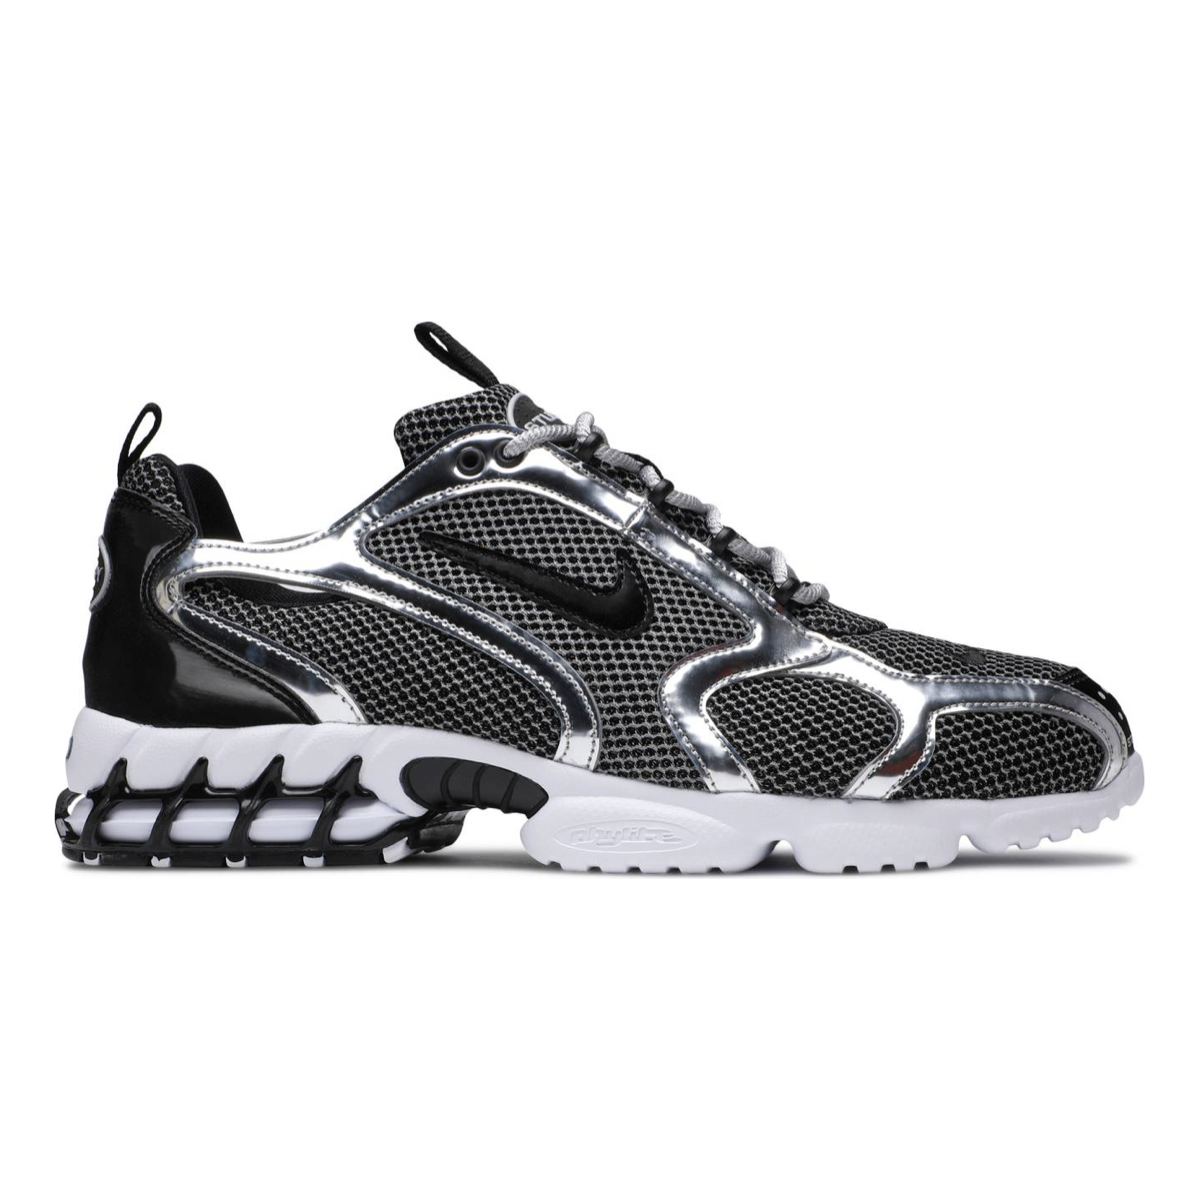 Nike Air Zoom Spiridon Cage 2 Stussy Pure Platinum by Nike from £290.00